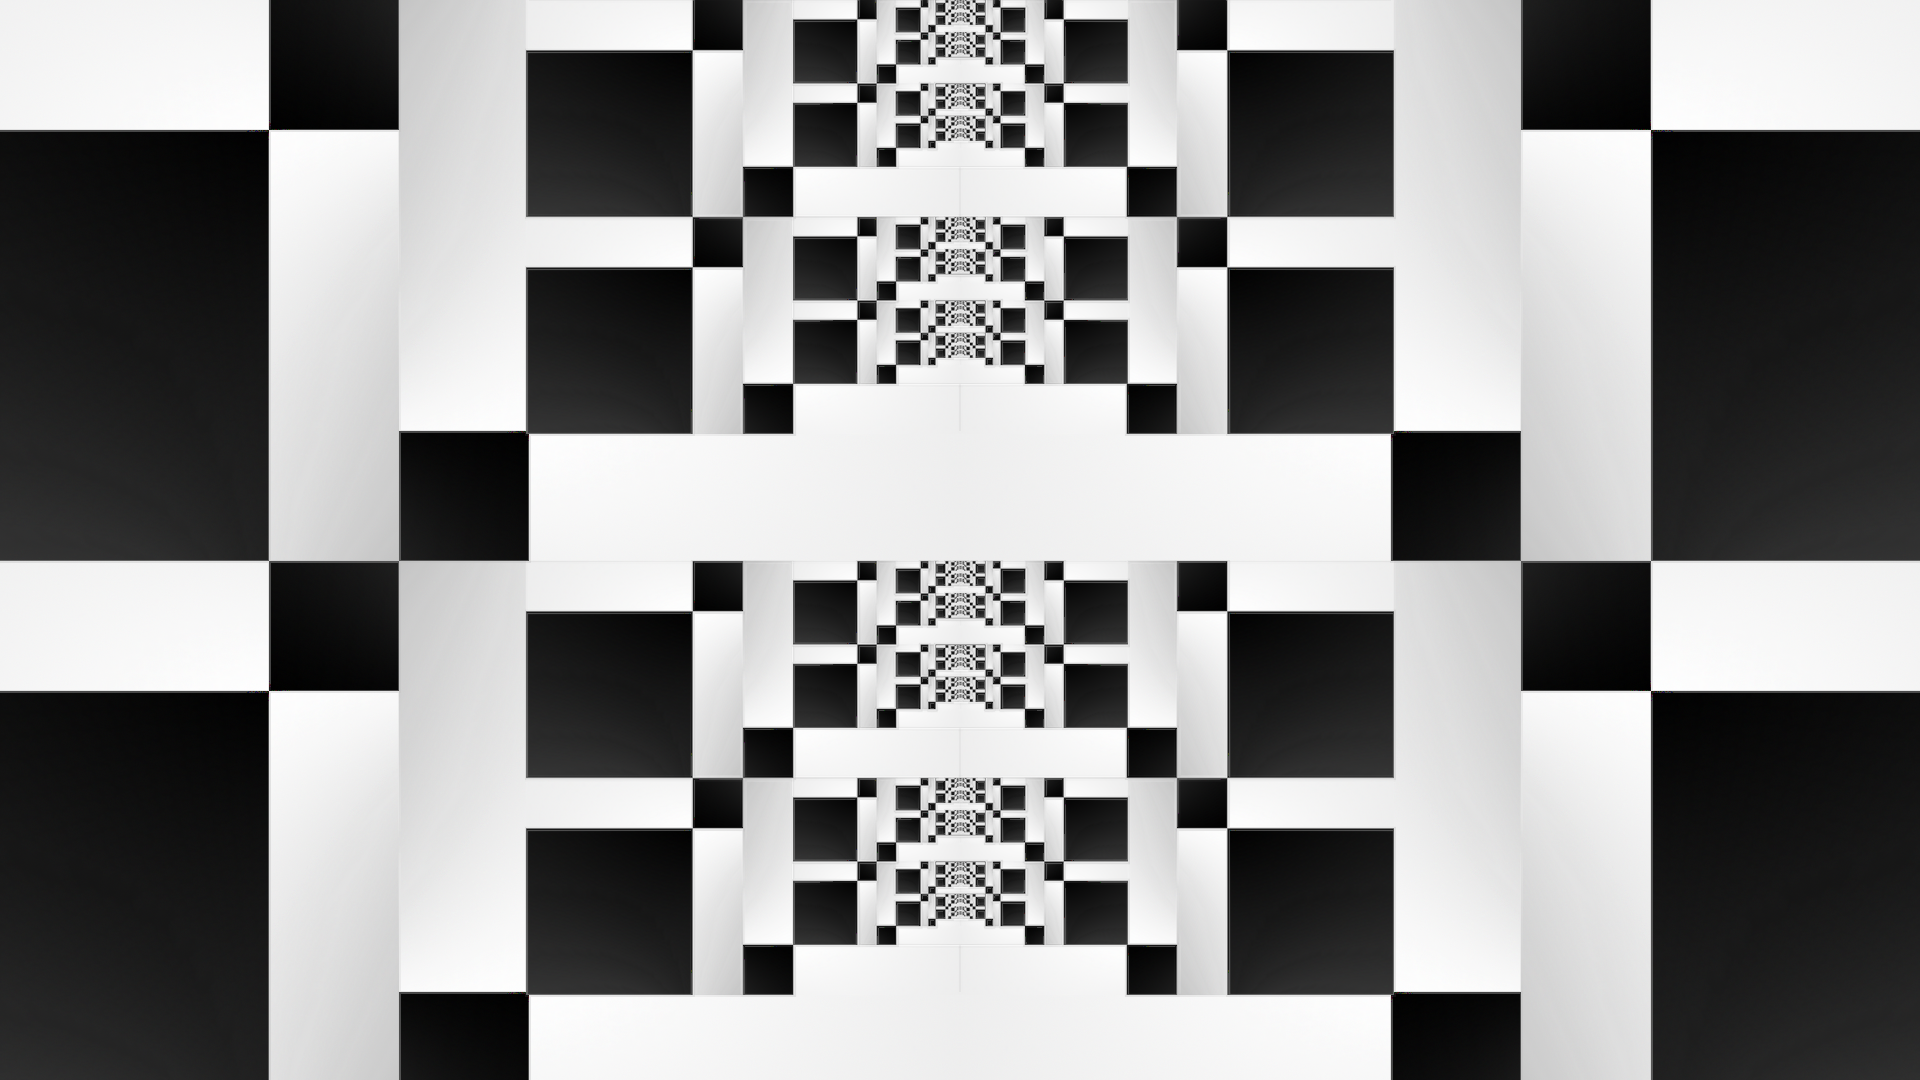 General 1920x1080 black white square shapes Bit abstract digital art optical illusion symmetry